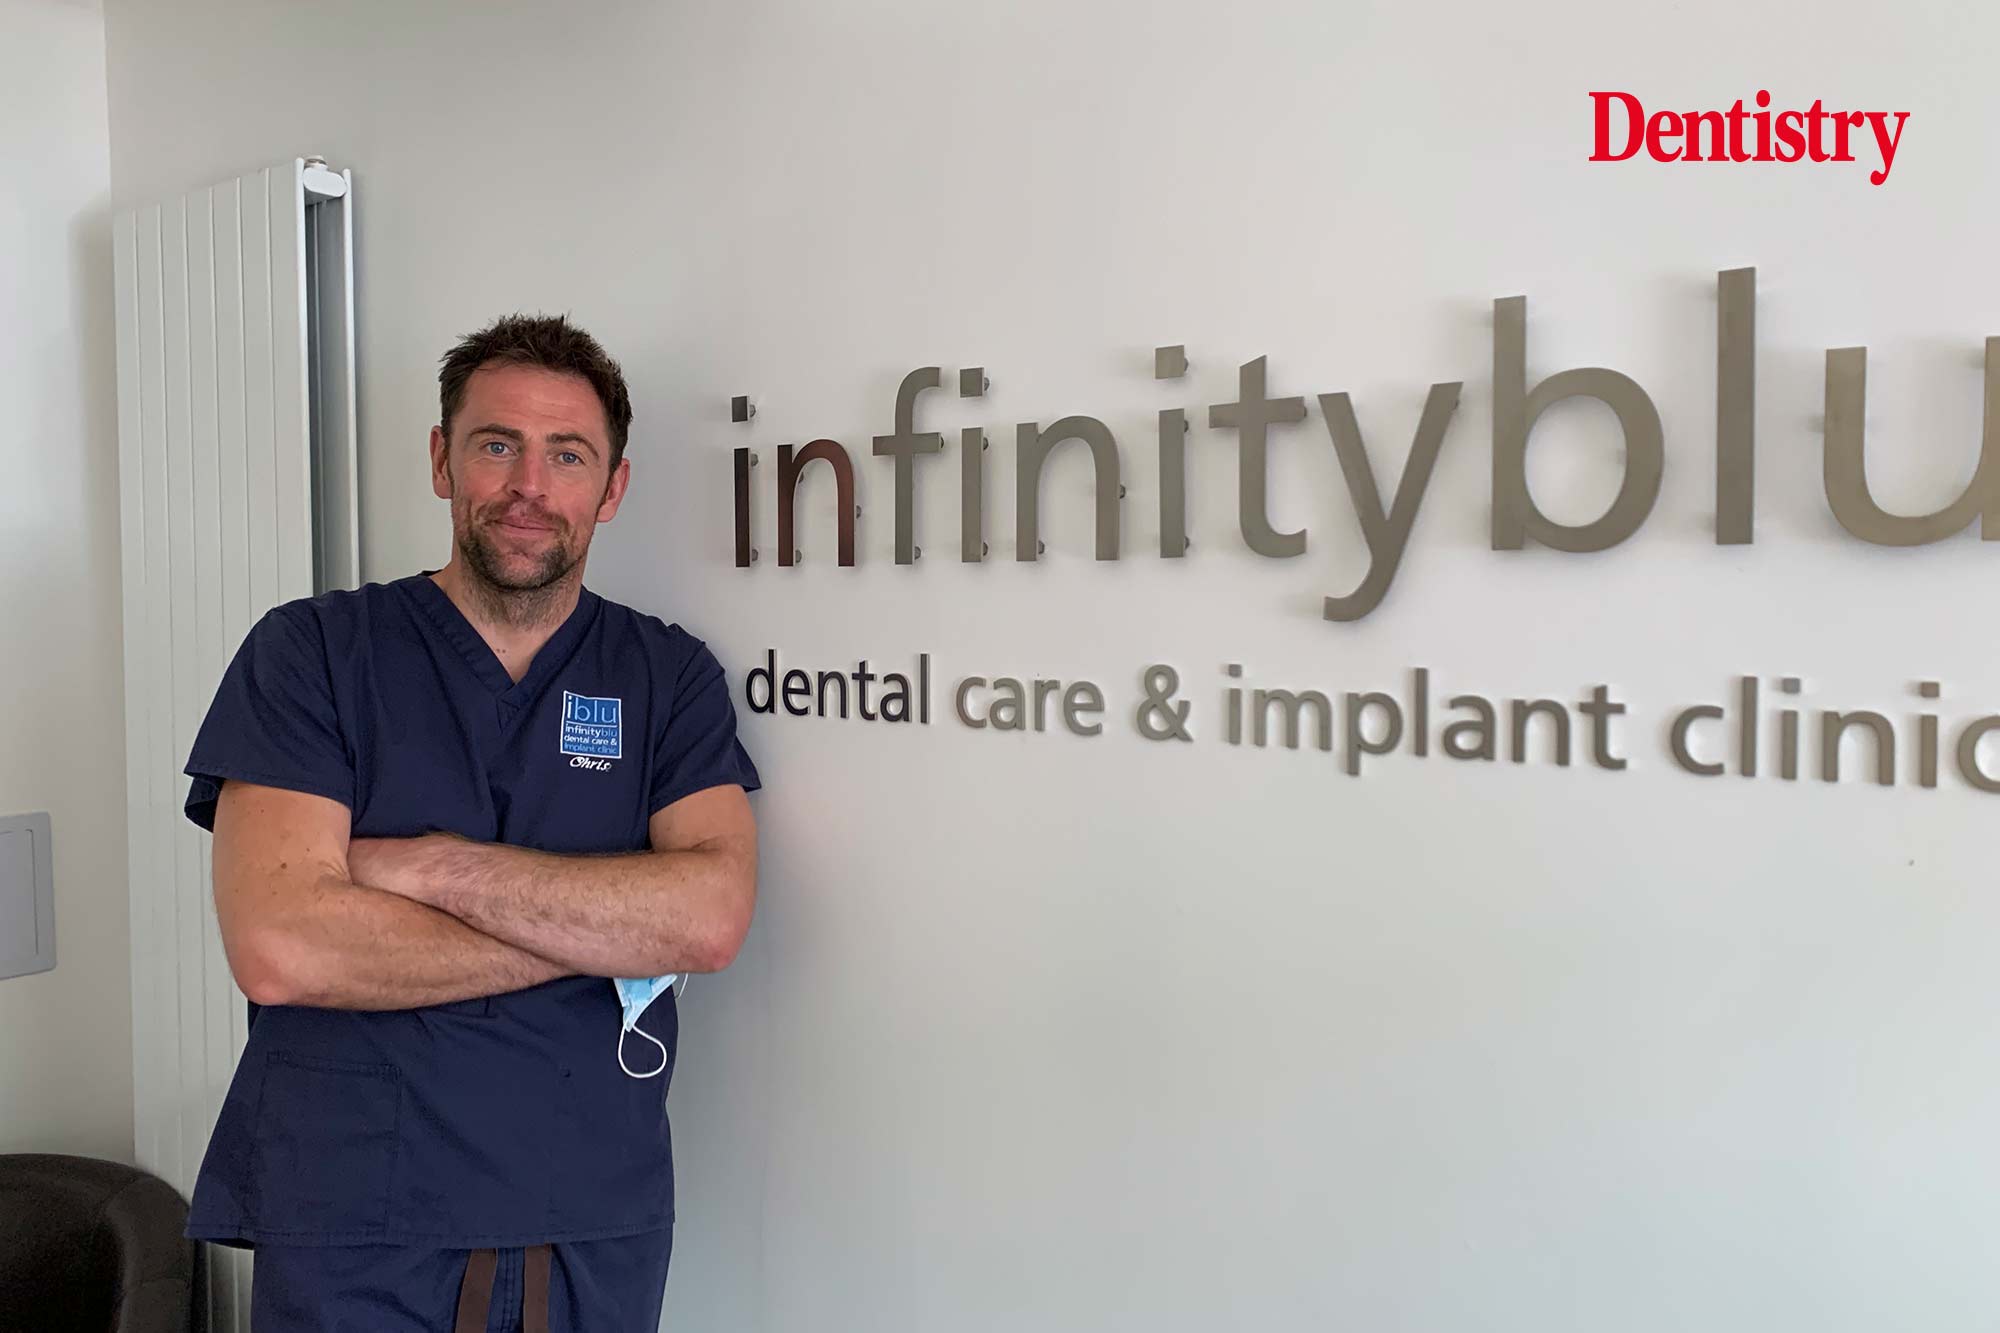 How a Scottish dental group is taking small steps to make a difference